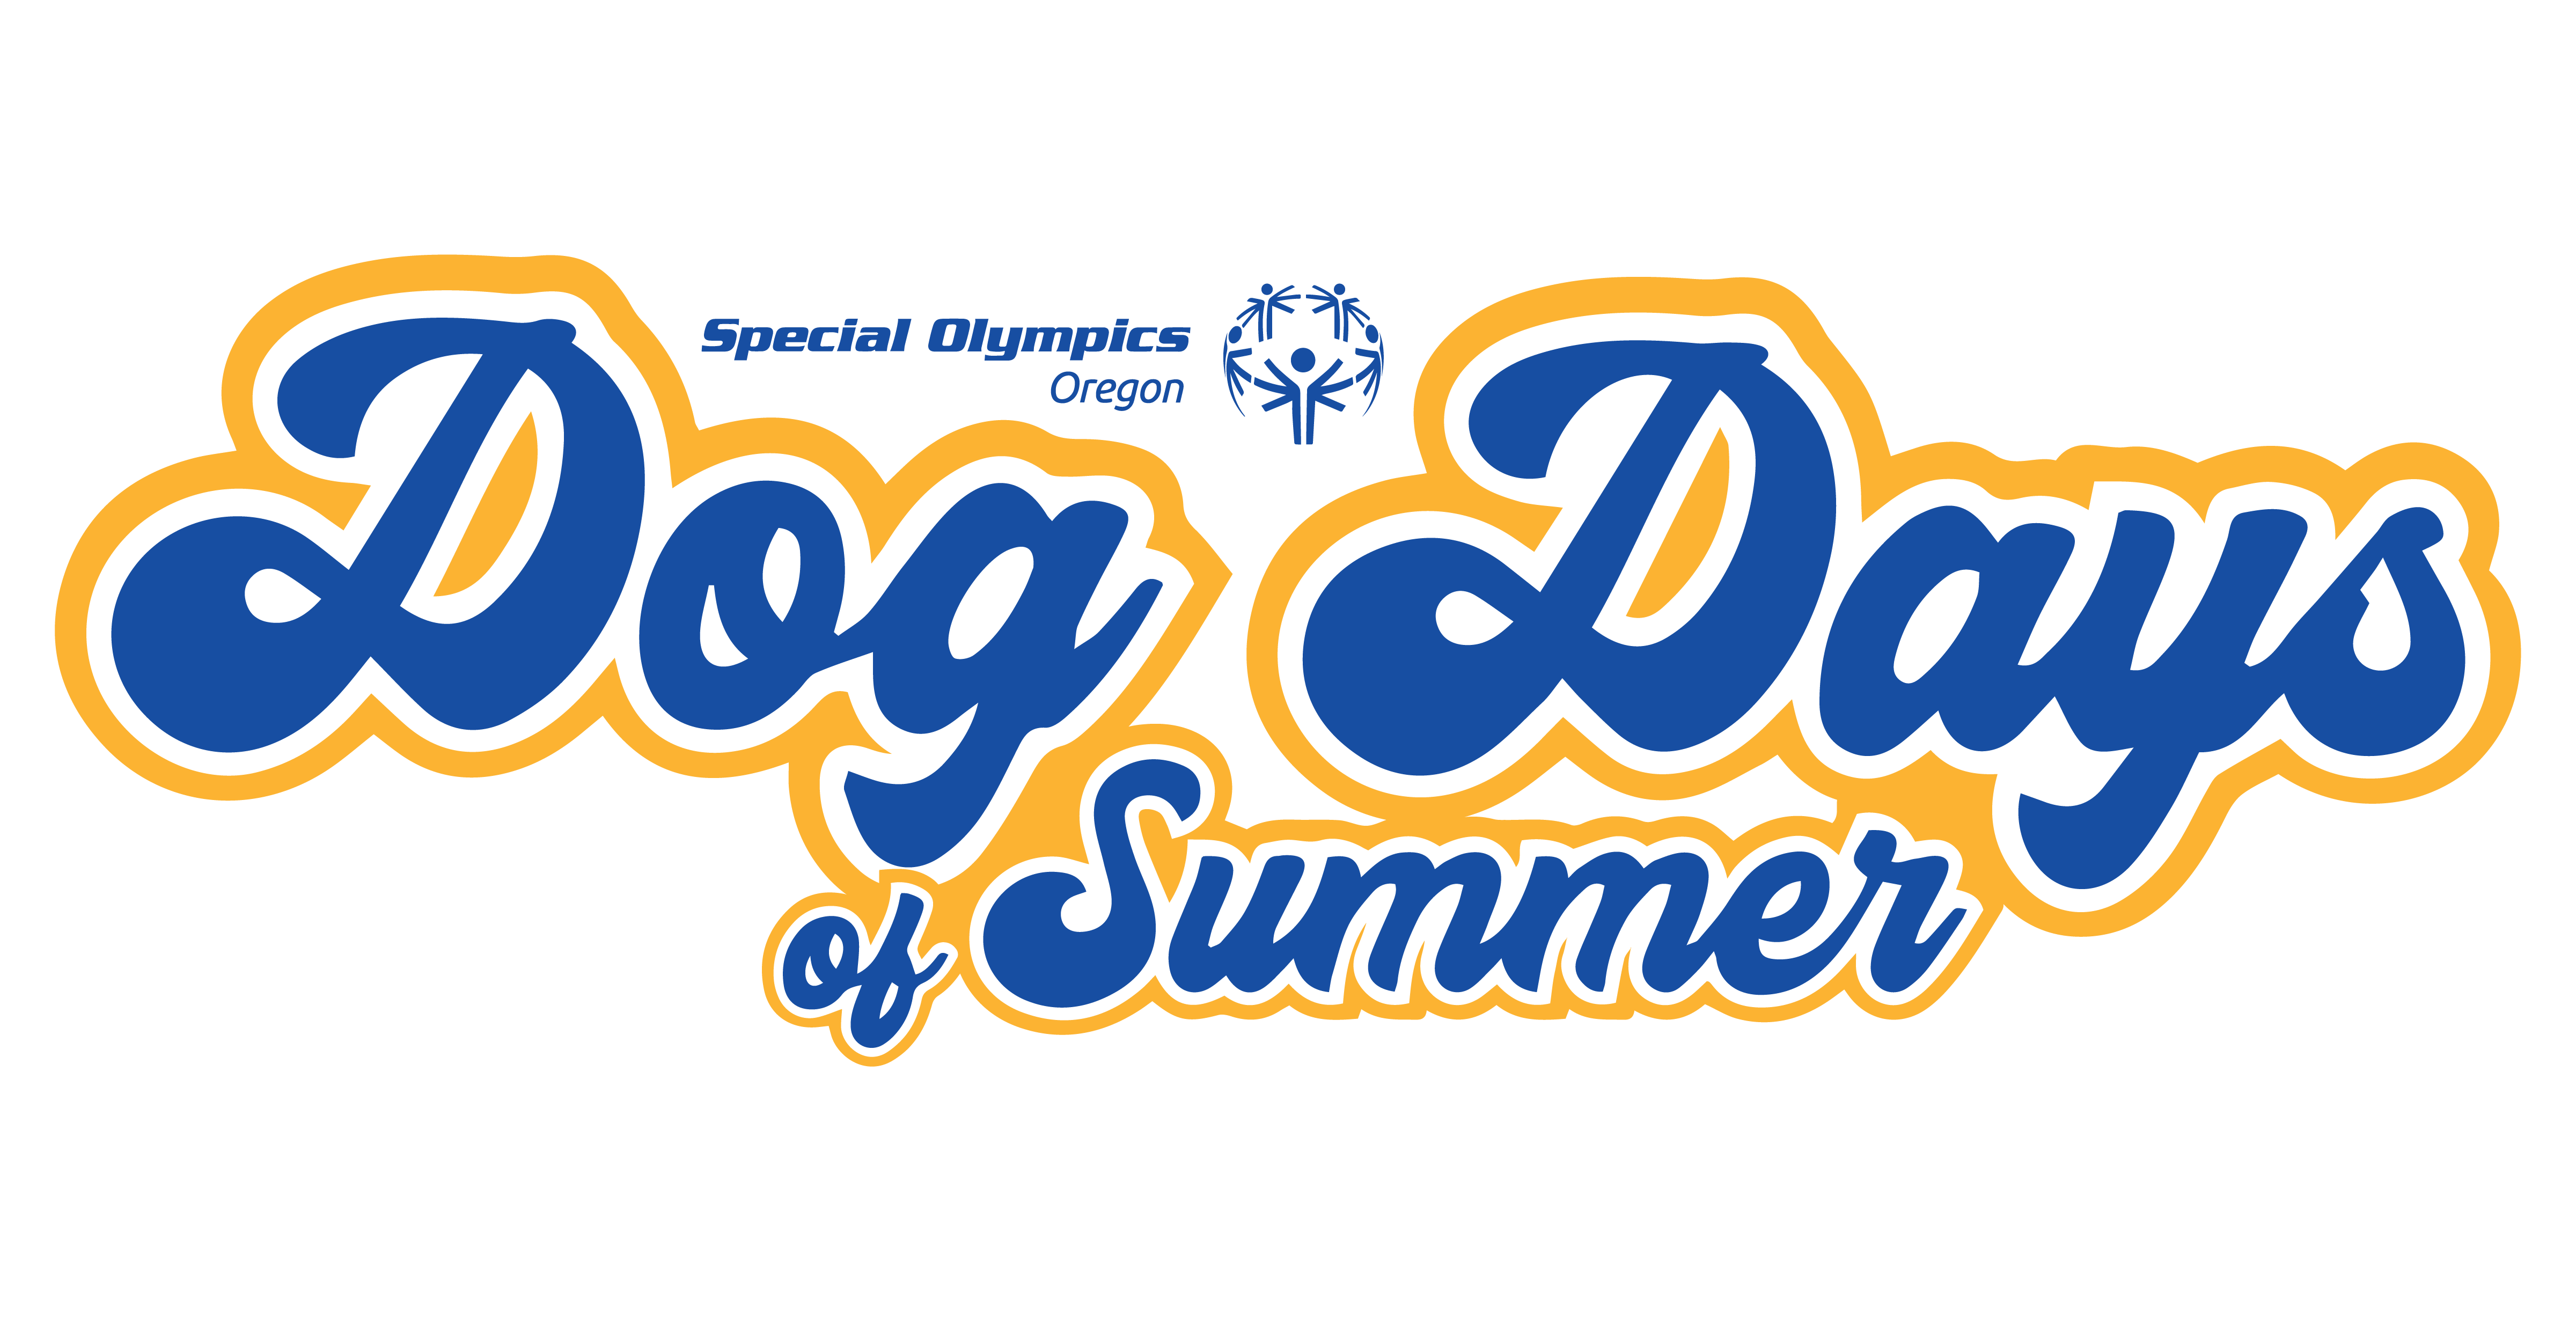 Dog Days of Summer Campaign